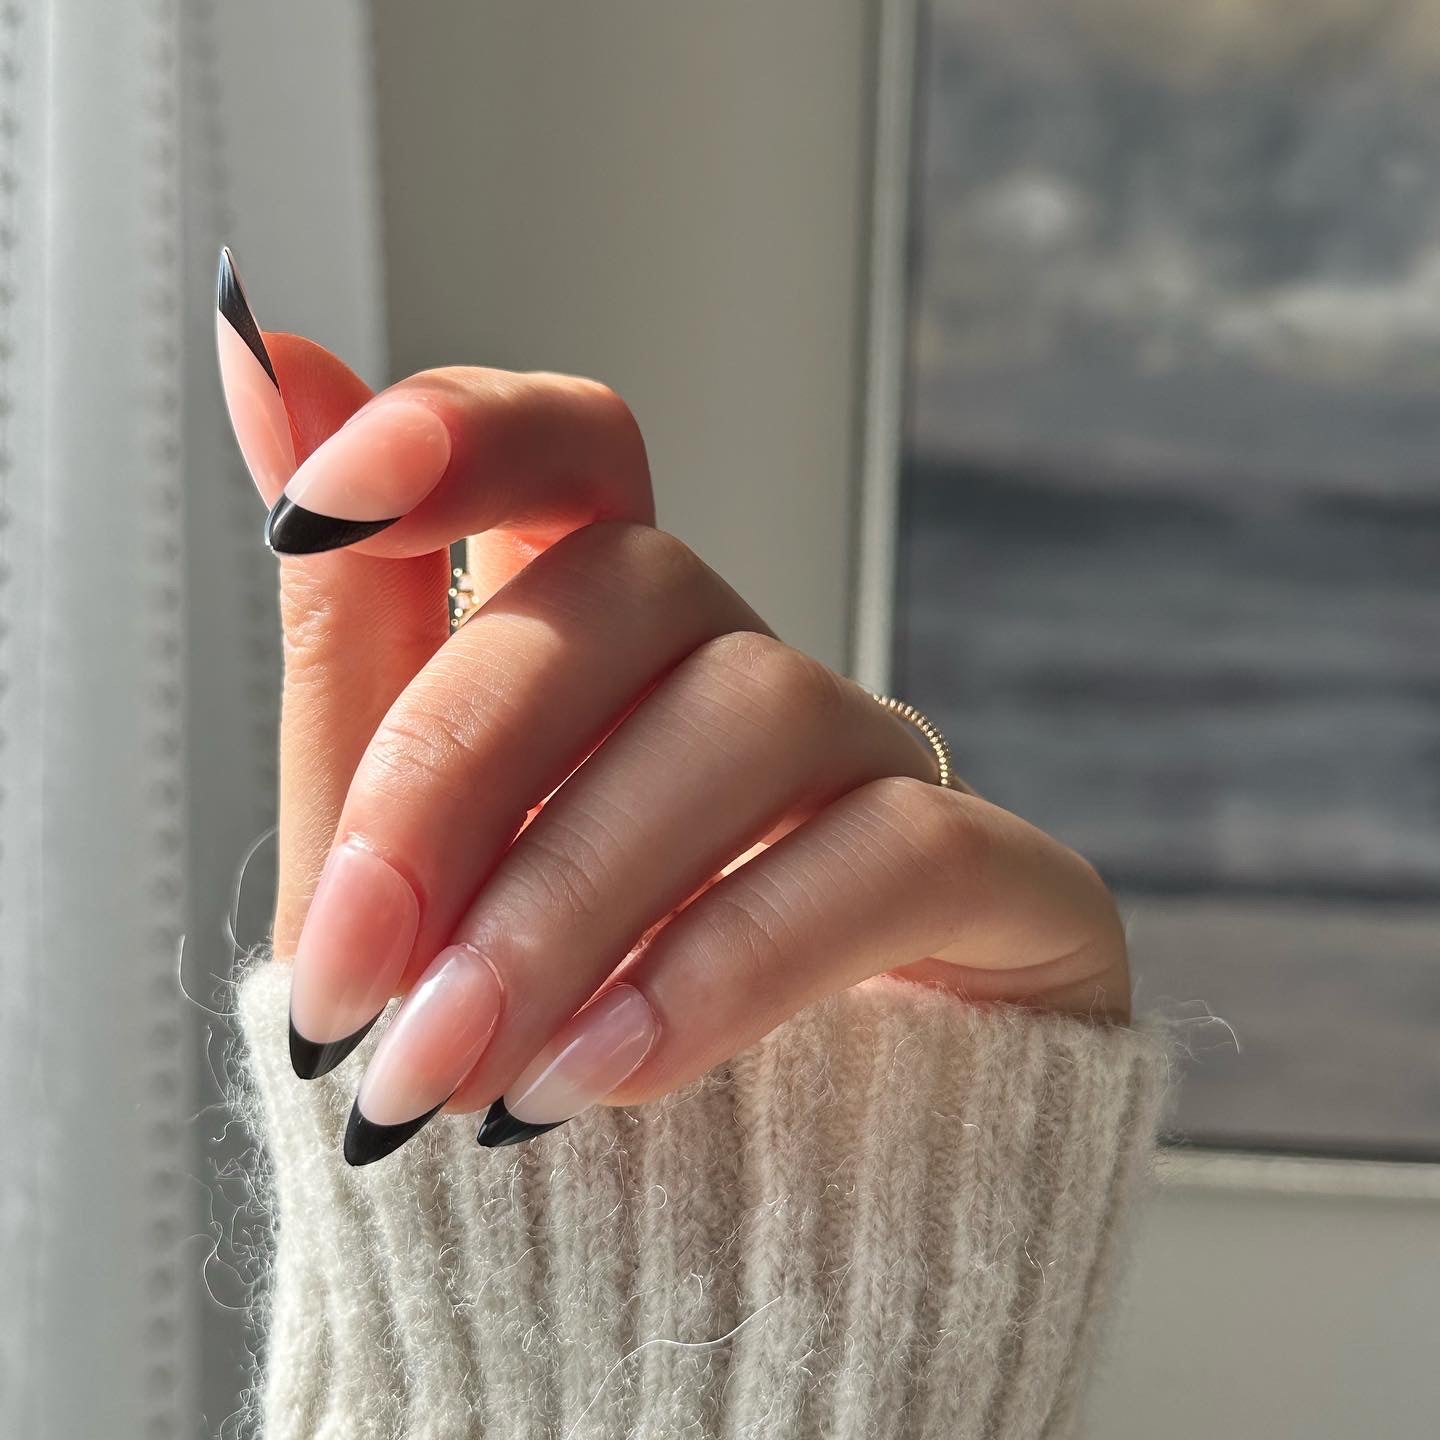 7 Black French Tip Nail Designs To Try For An Edgy Spring Manicure